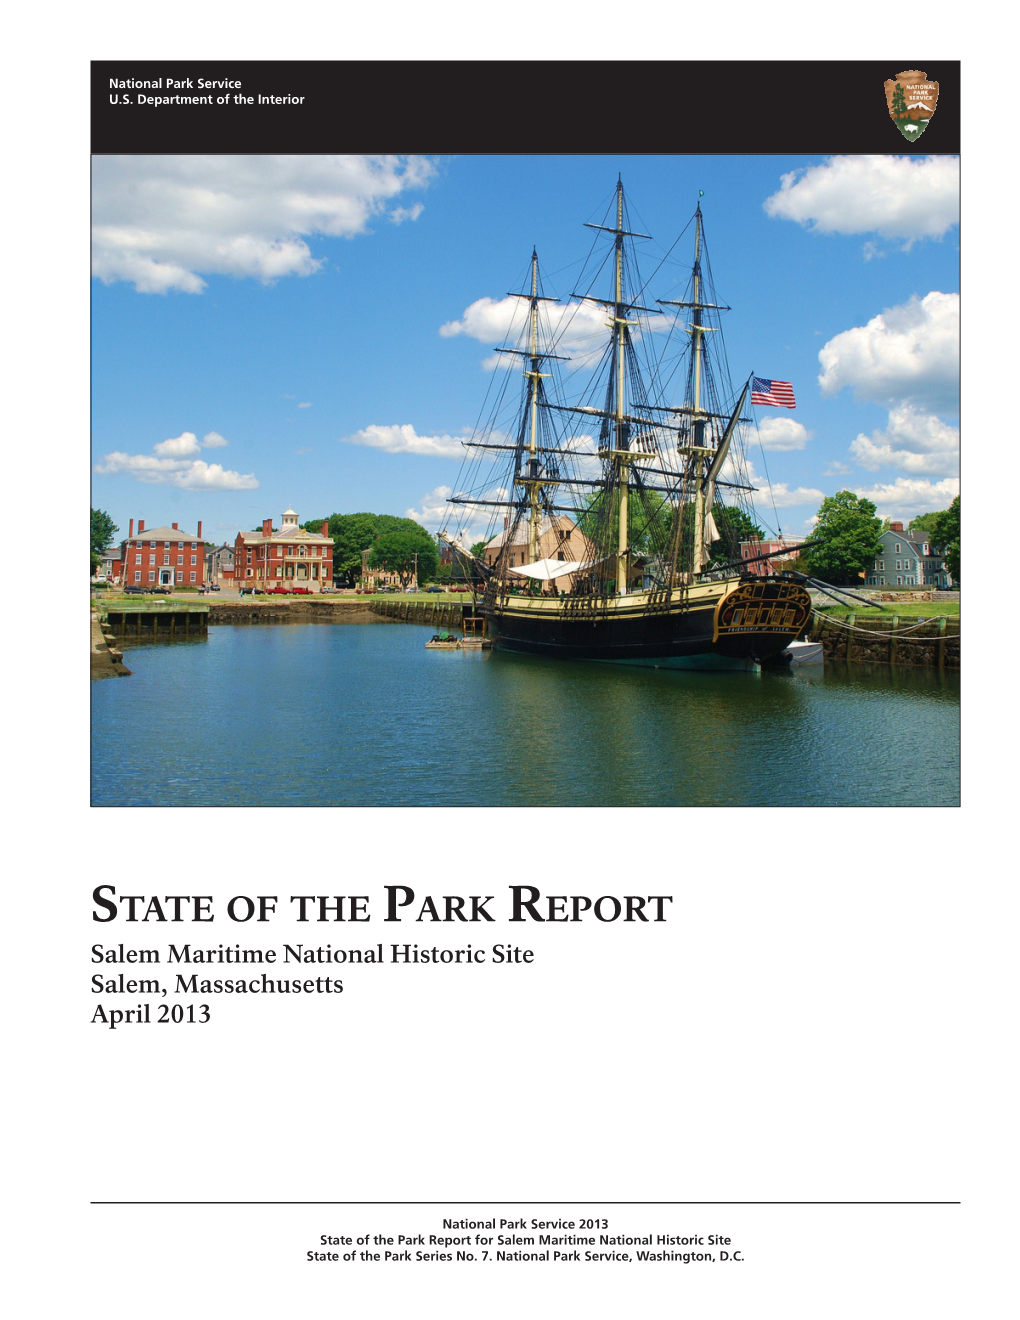 State of the Park Report, Salem Maritime National Historic Site